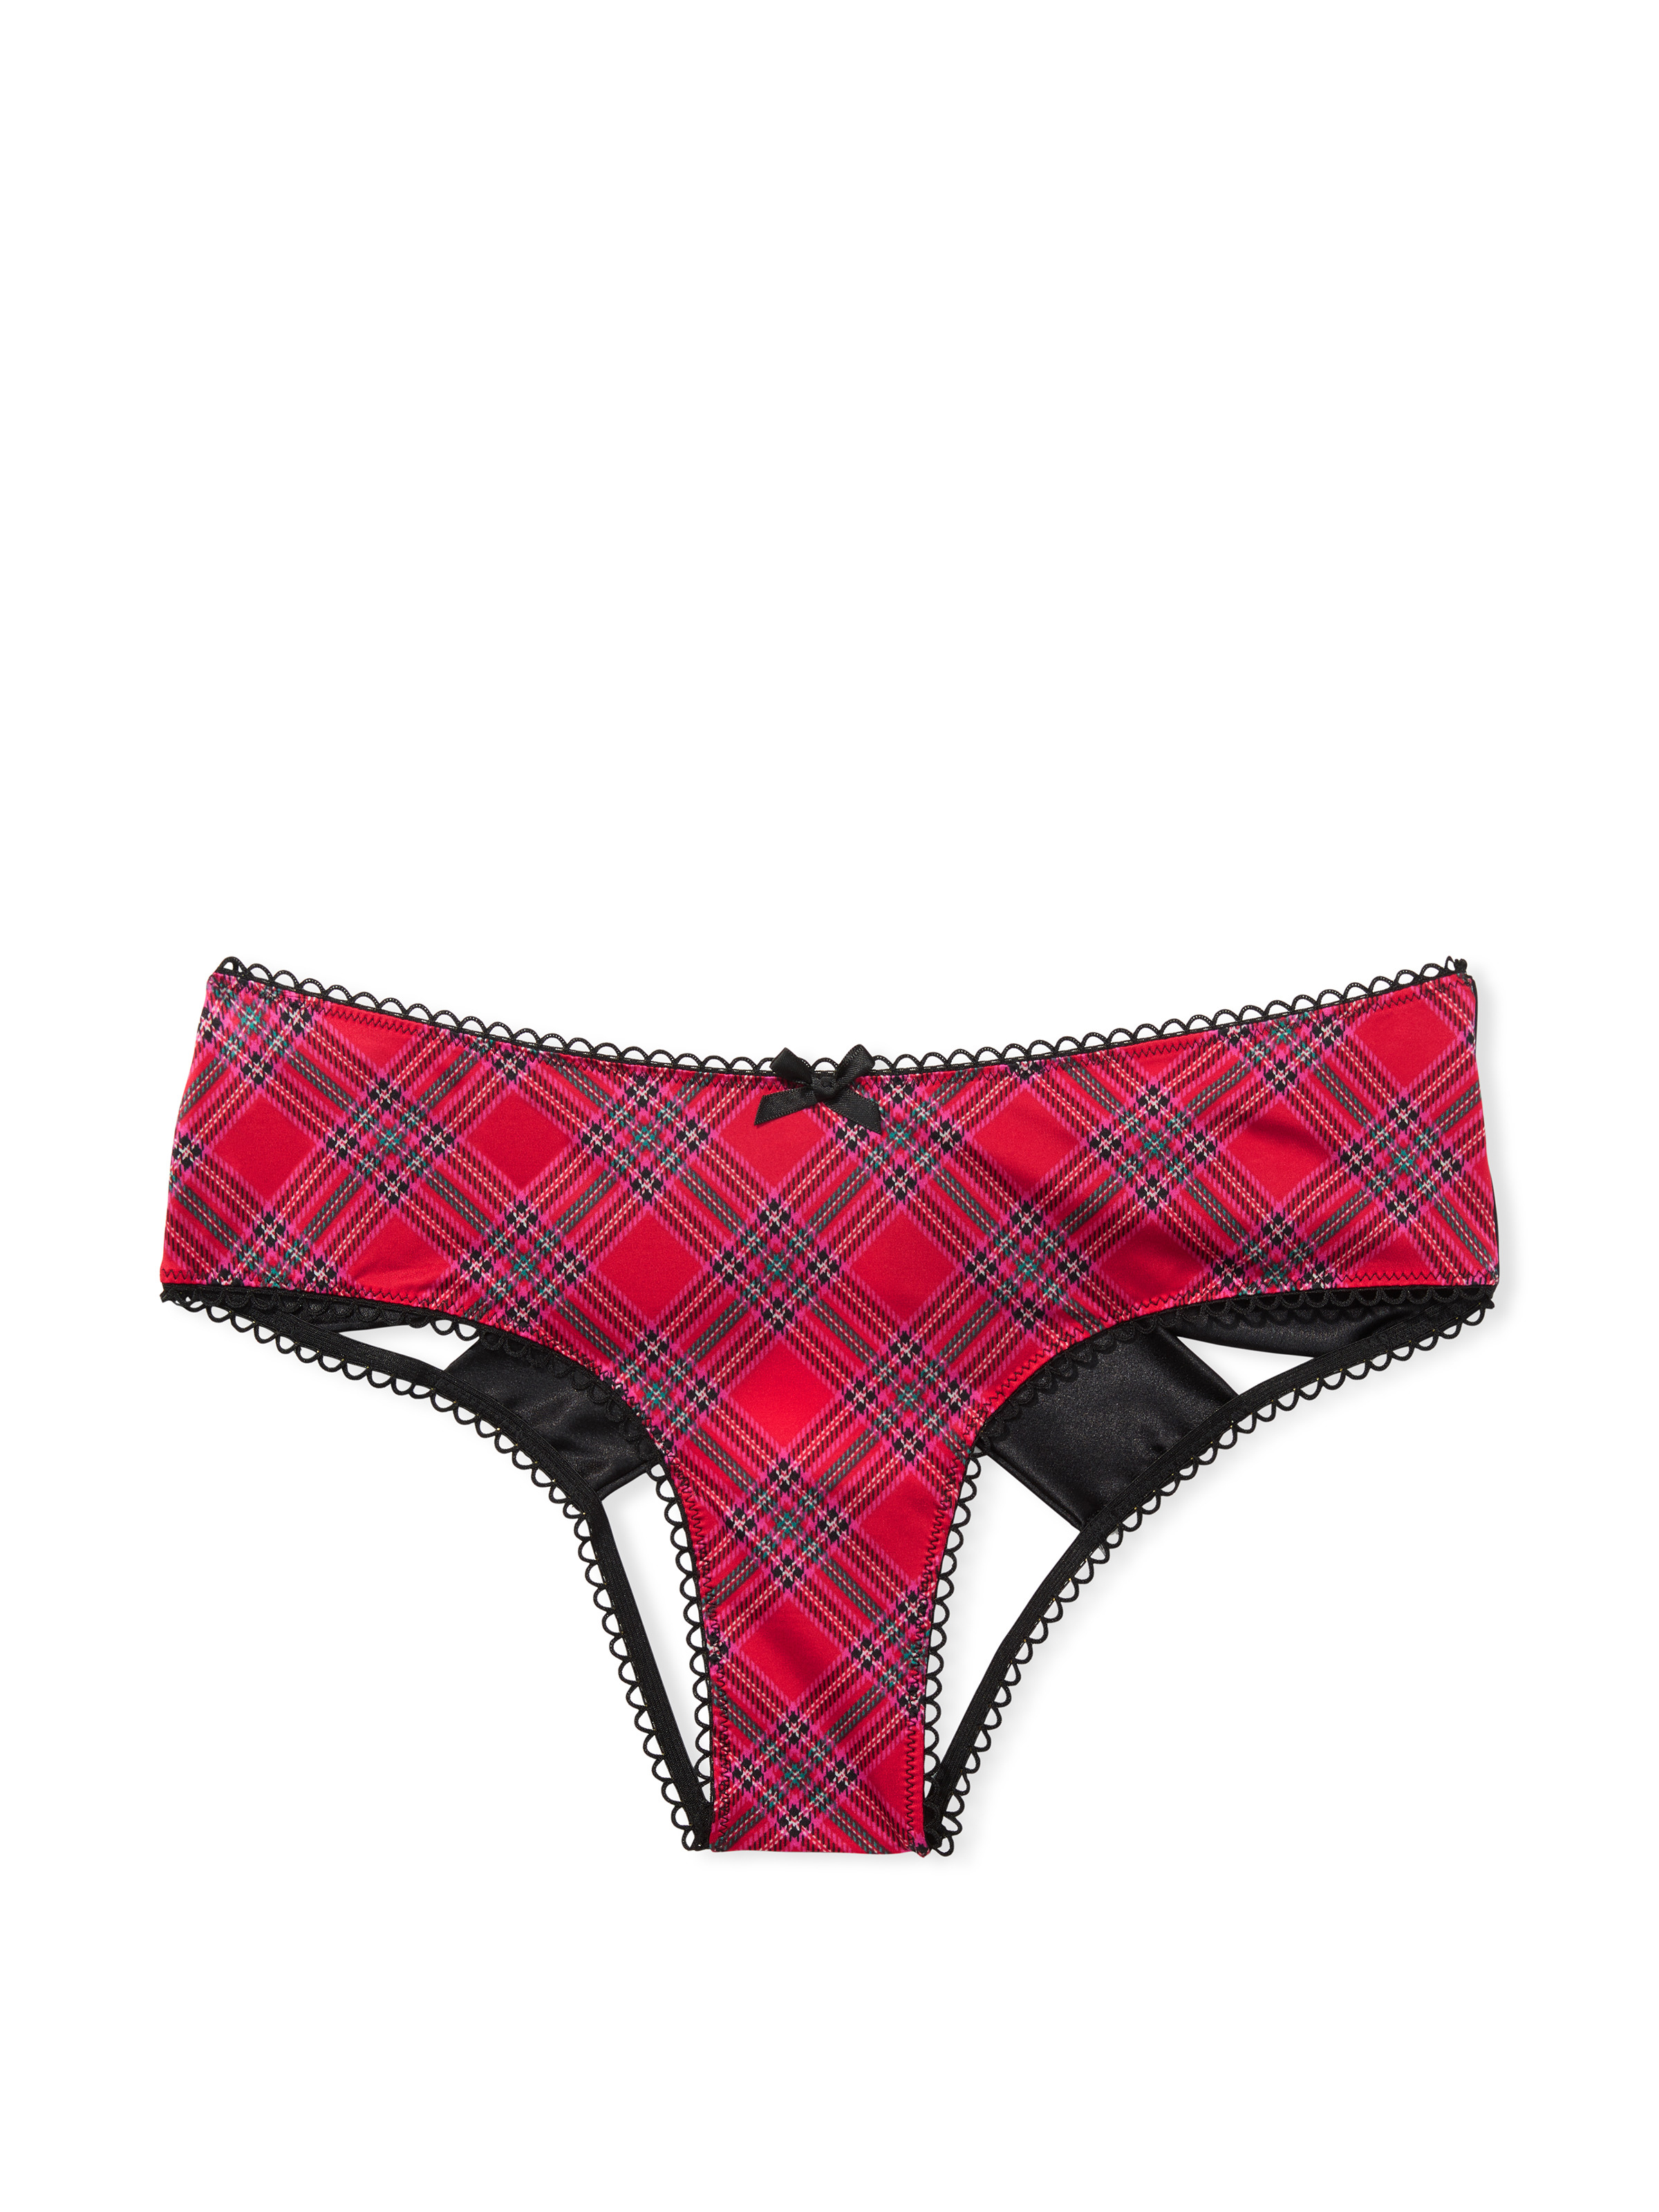 Victoria's Secret Very Sexy Embroidered Thong Panty Color Red Plaid New